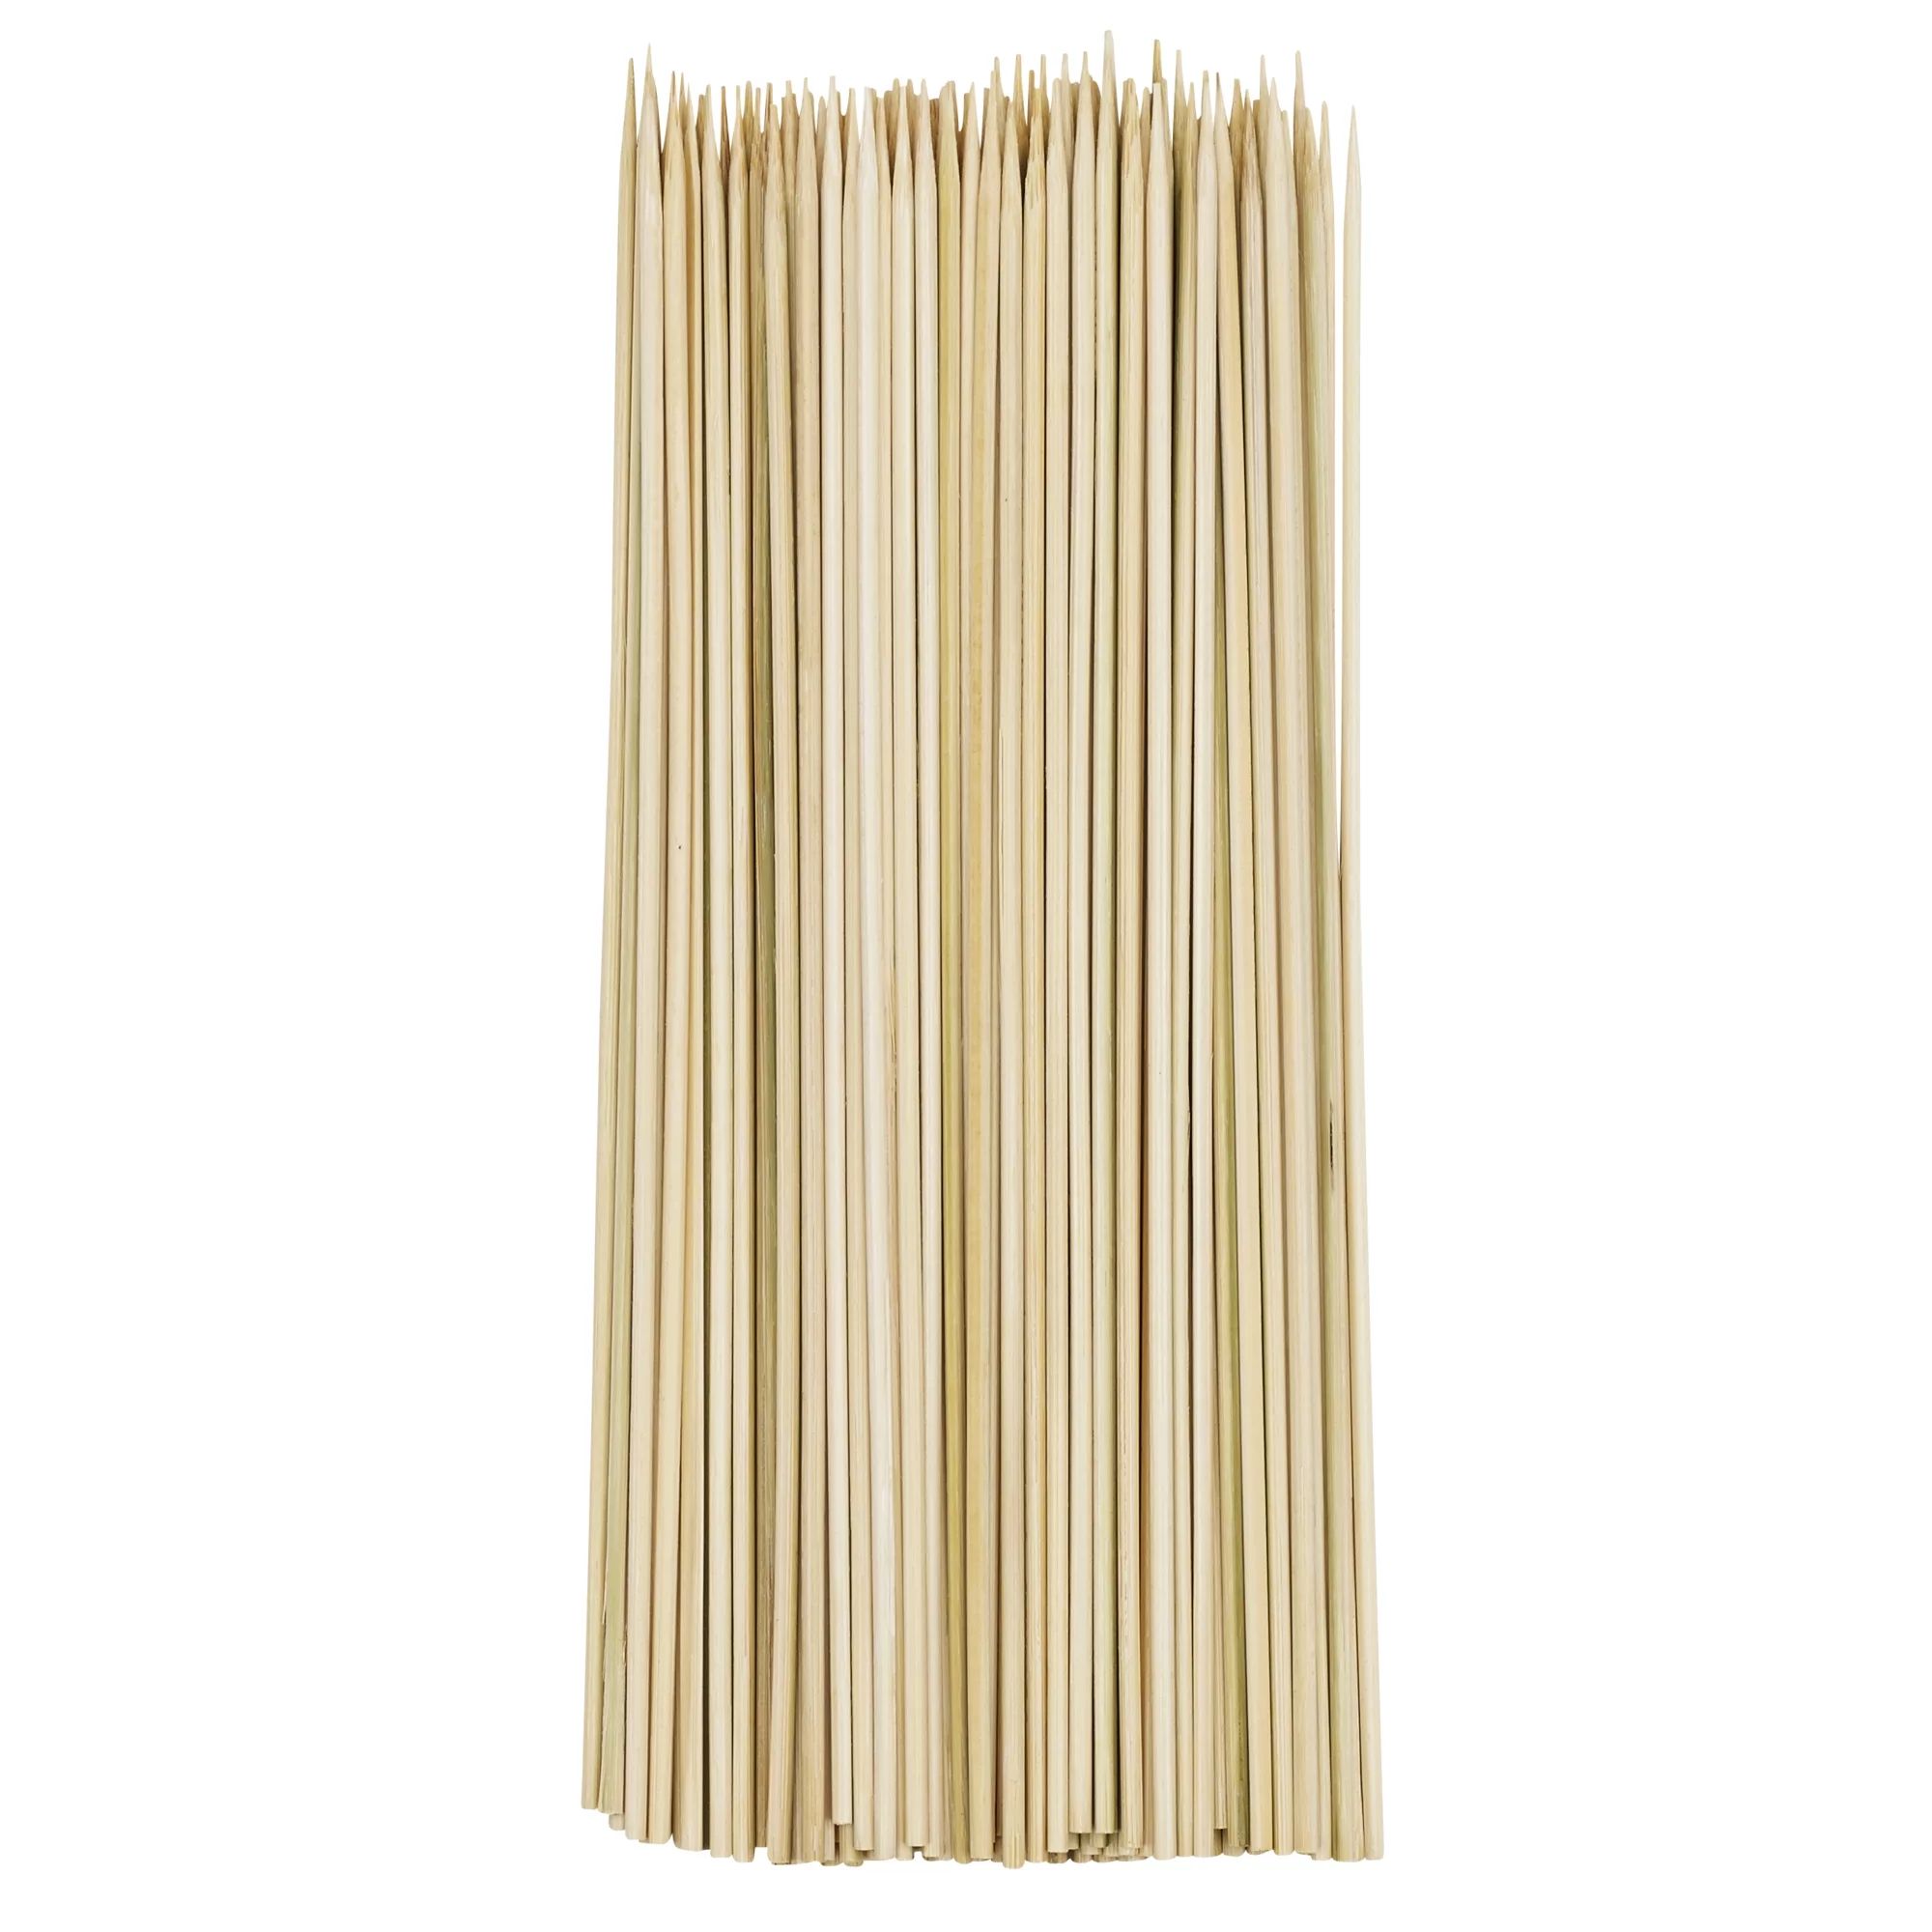 GoodCook ProFreshionals 10" Bamboo Skewers for BBQ and Kebab 100-count, Natural | Walmart (US)